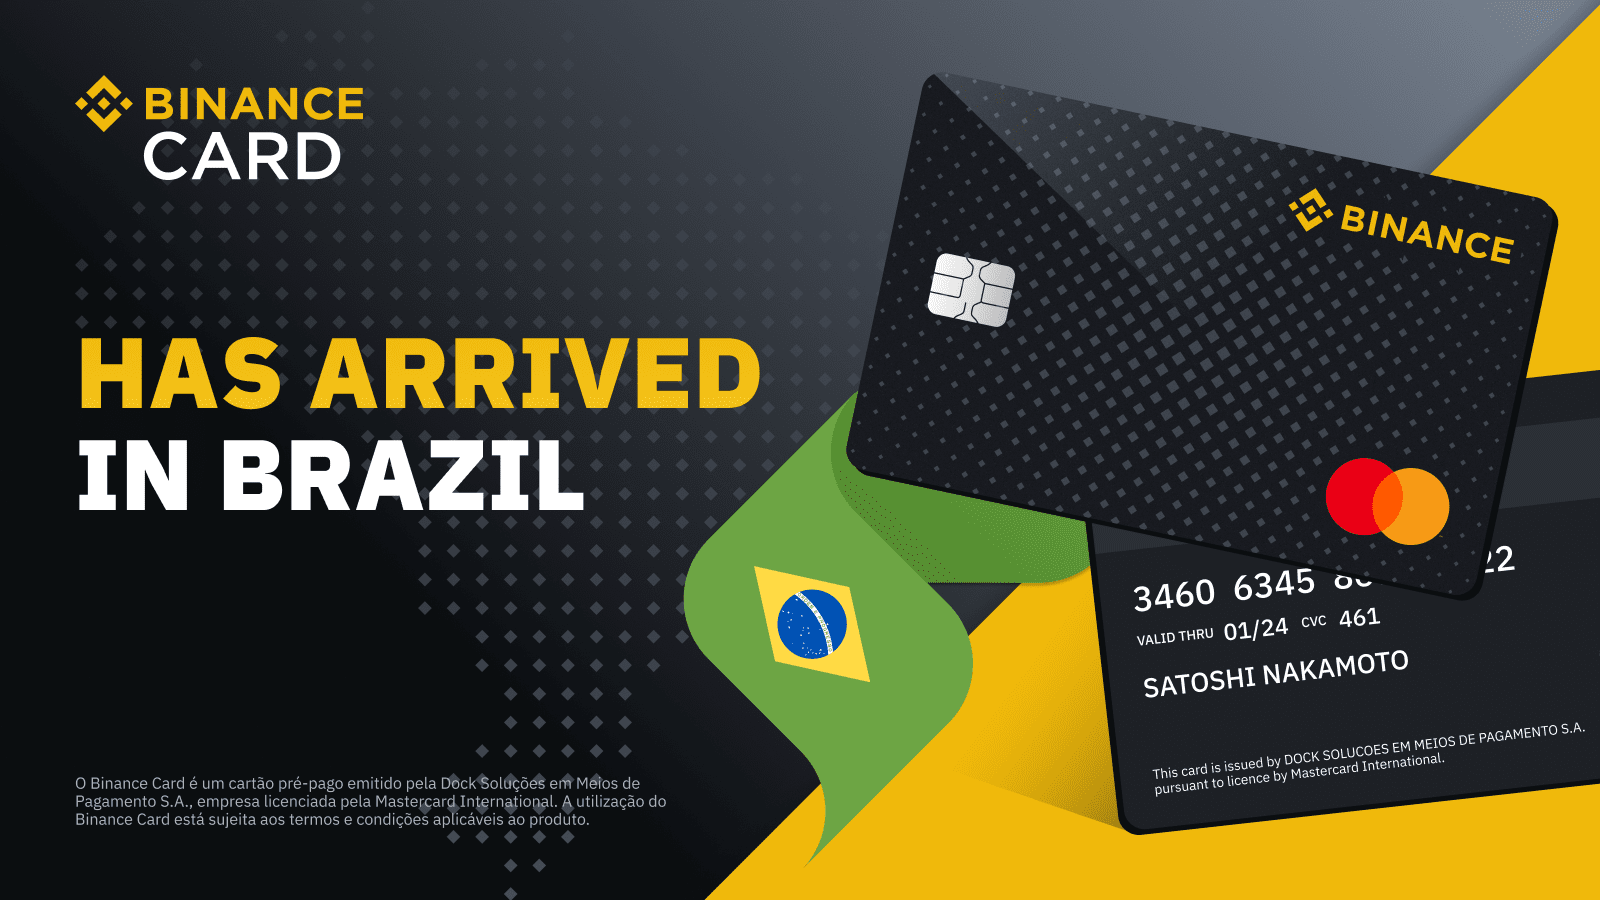 The global cryptocurrency exchange Binance collaborated with Mastercard to introduce a prepaid cryptocurrency card known as the "Binance card" in Brazil. This card will enable Binance's customers to more easily make purchases and pay bills using cryptocurrencies at any of the more than 90 million merchants that accept Mastercard around the world, both in-person and online.

According to the announcement, the Binance Card will be accessible to all new and current Binance users in Brazil that have a valid national ID. The card will be provided by Dock. The card is now in the beta launch phase, and in the next weeks, it will be made accessible to a wider audience.